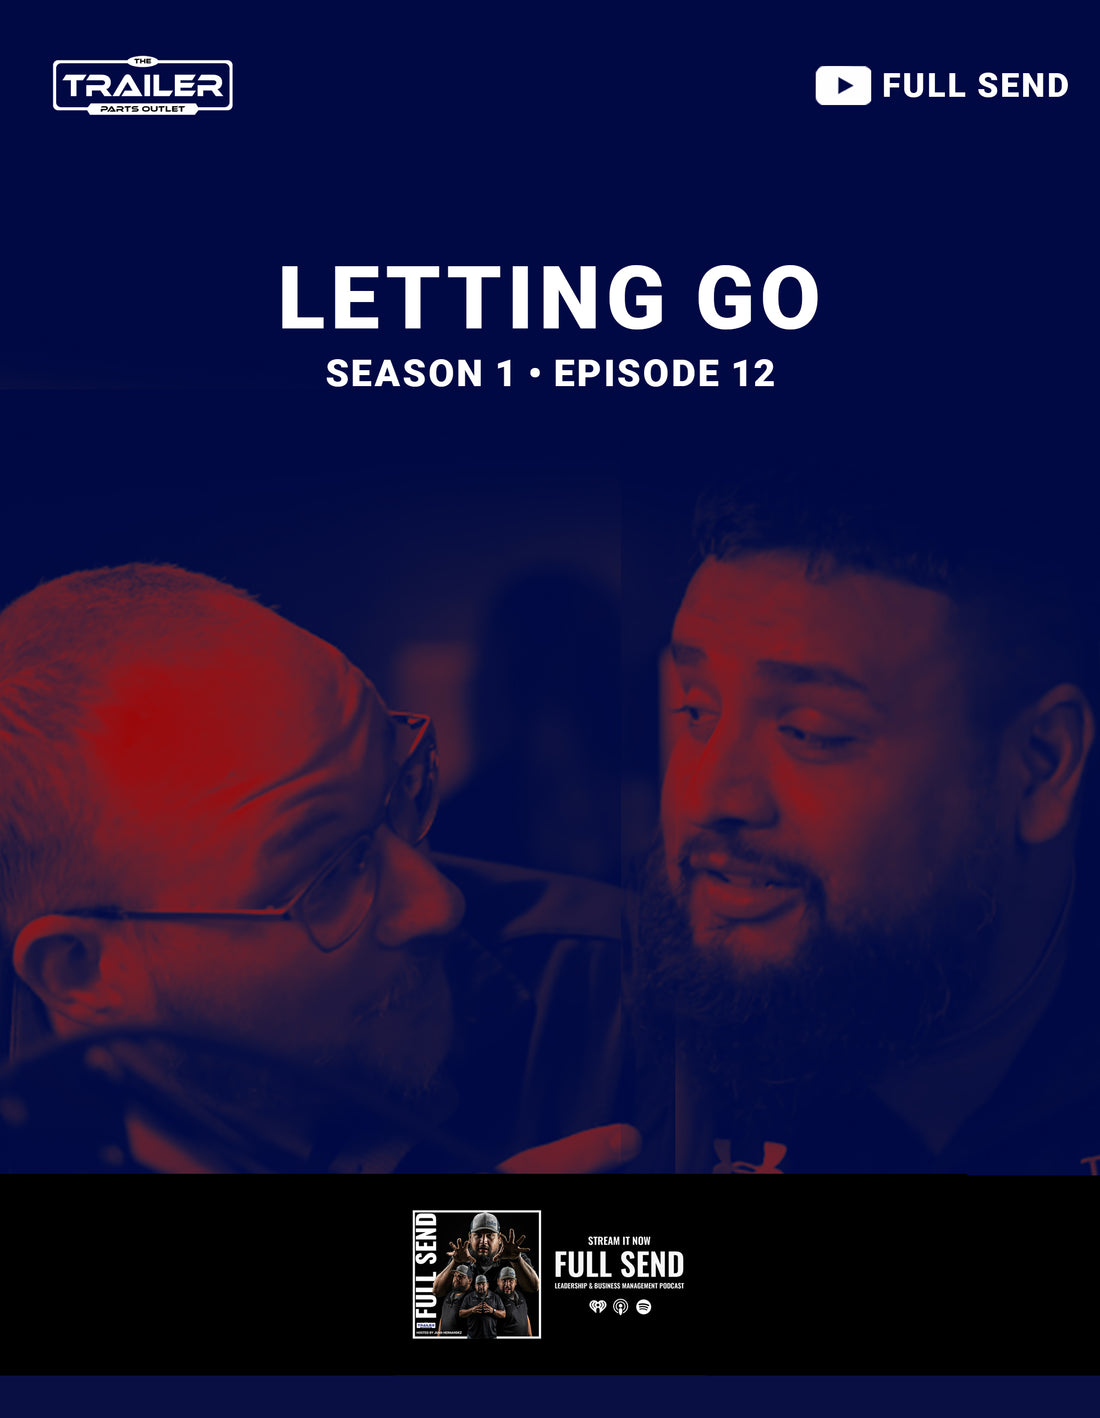 Learning to let go